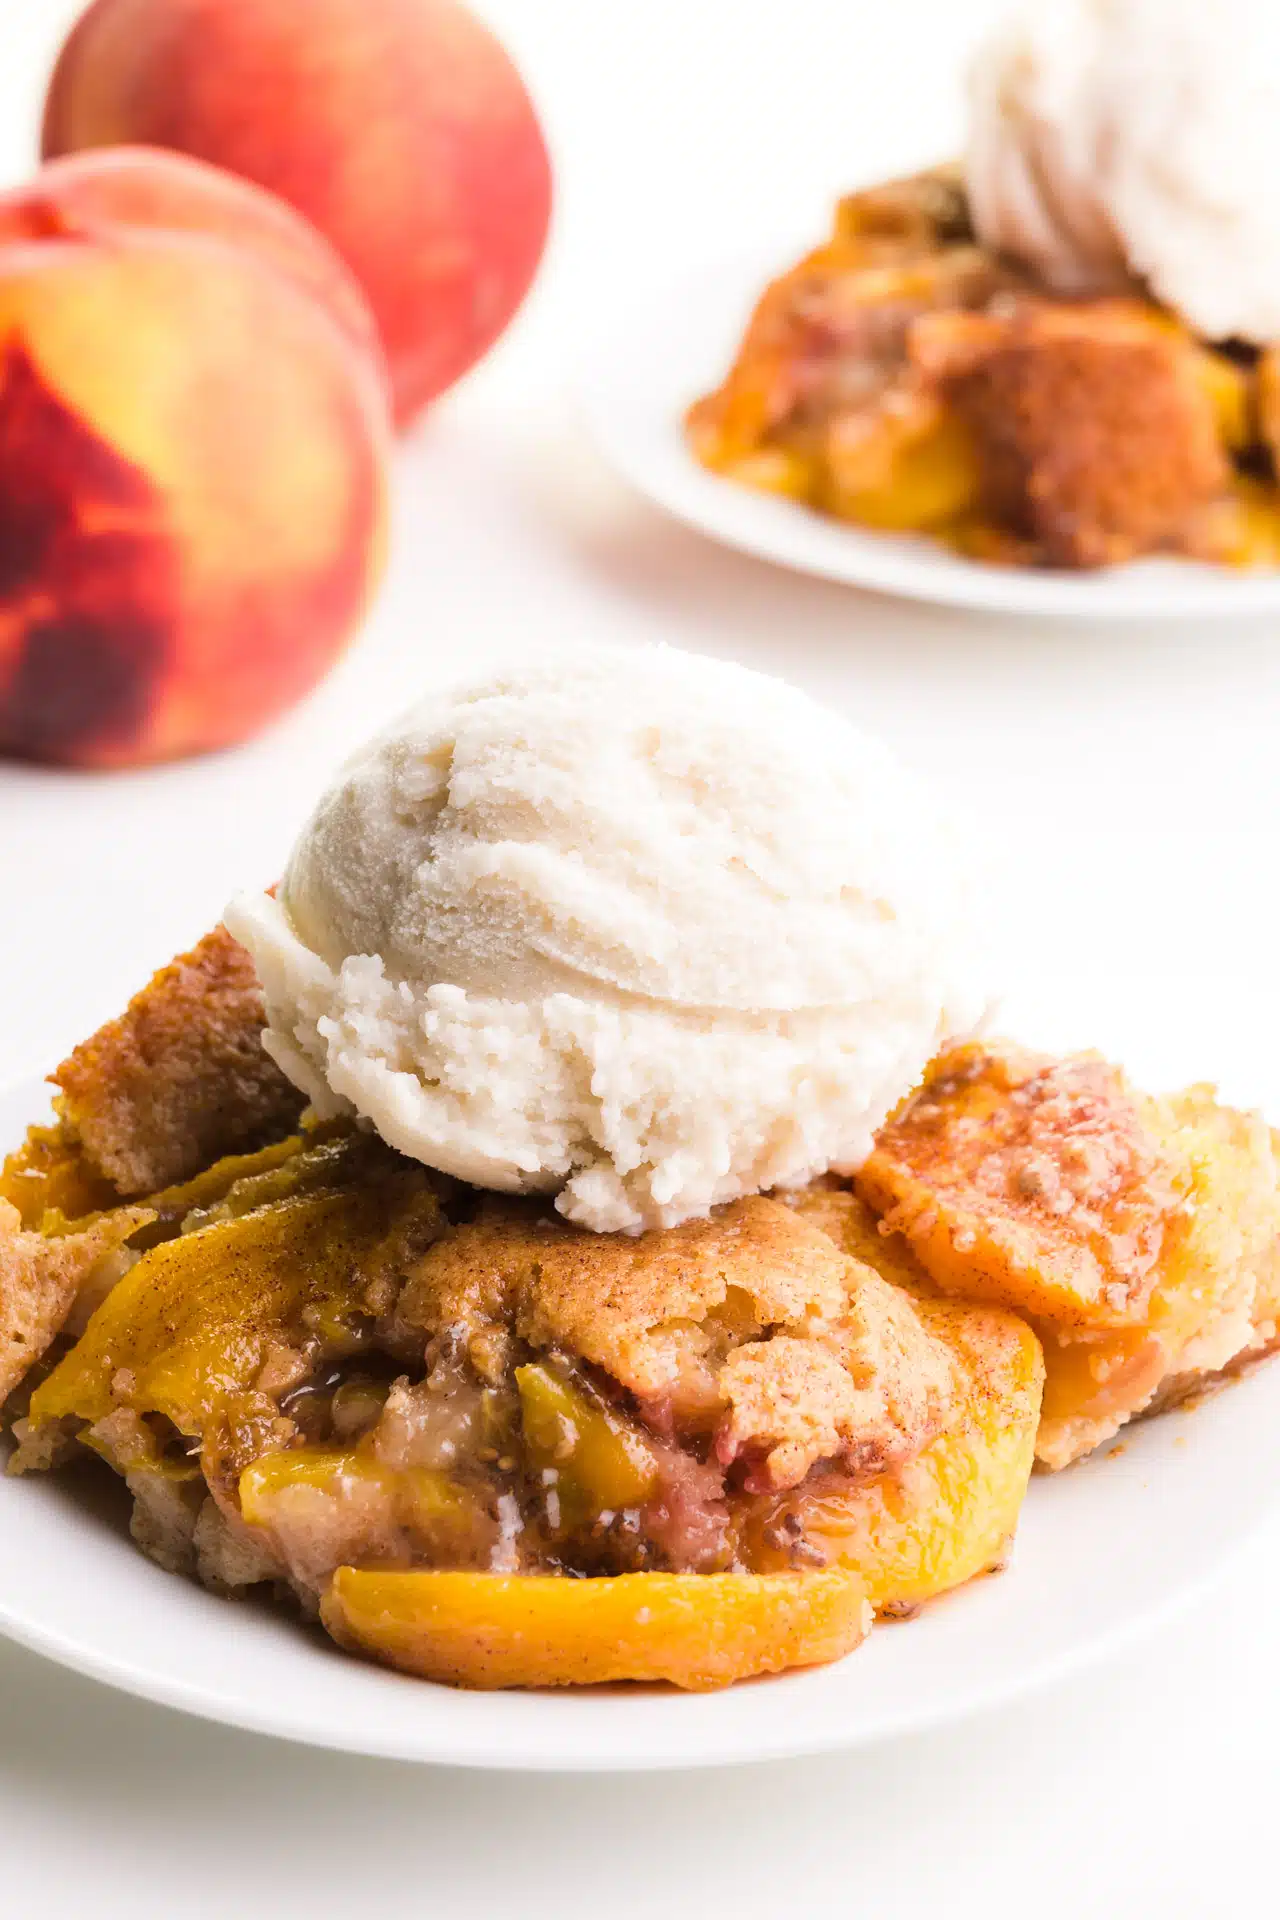 Vegan peach cobbler on a plate sits in front of fresh peaches and another plateful of cobbler.